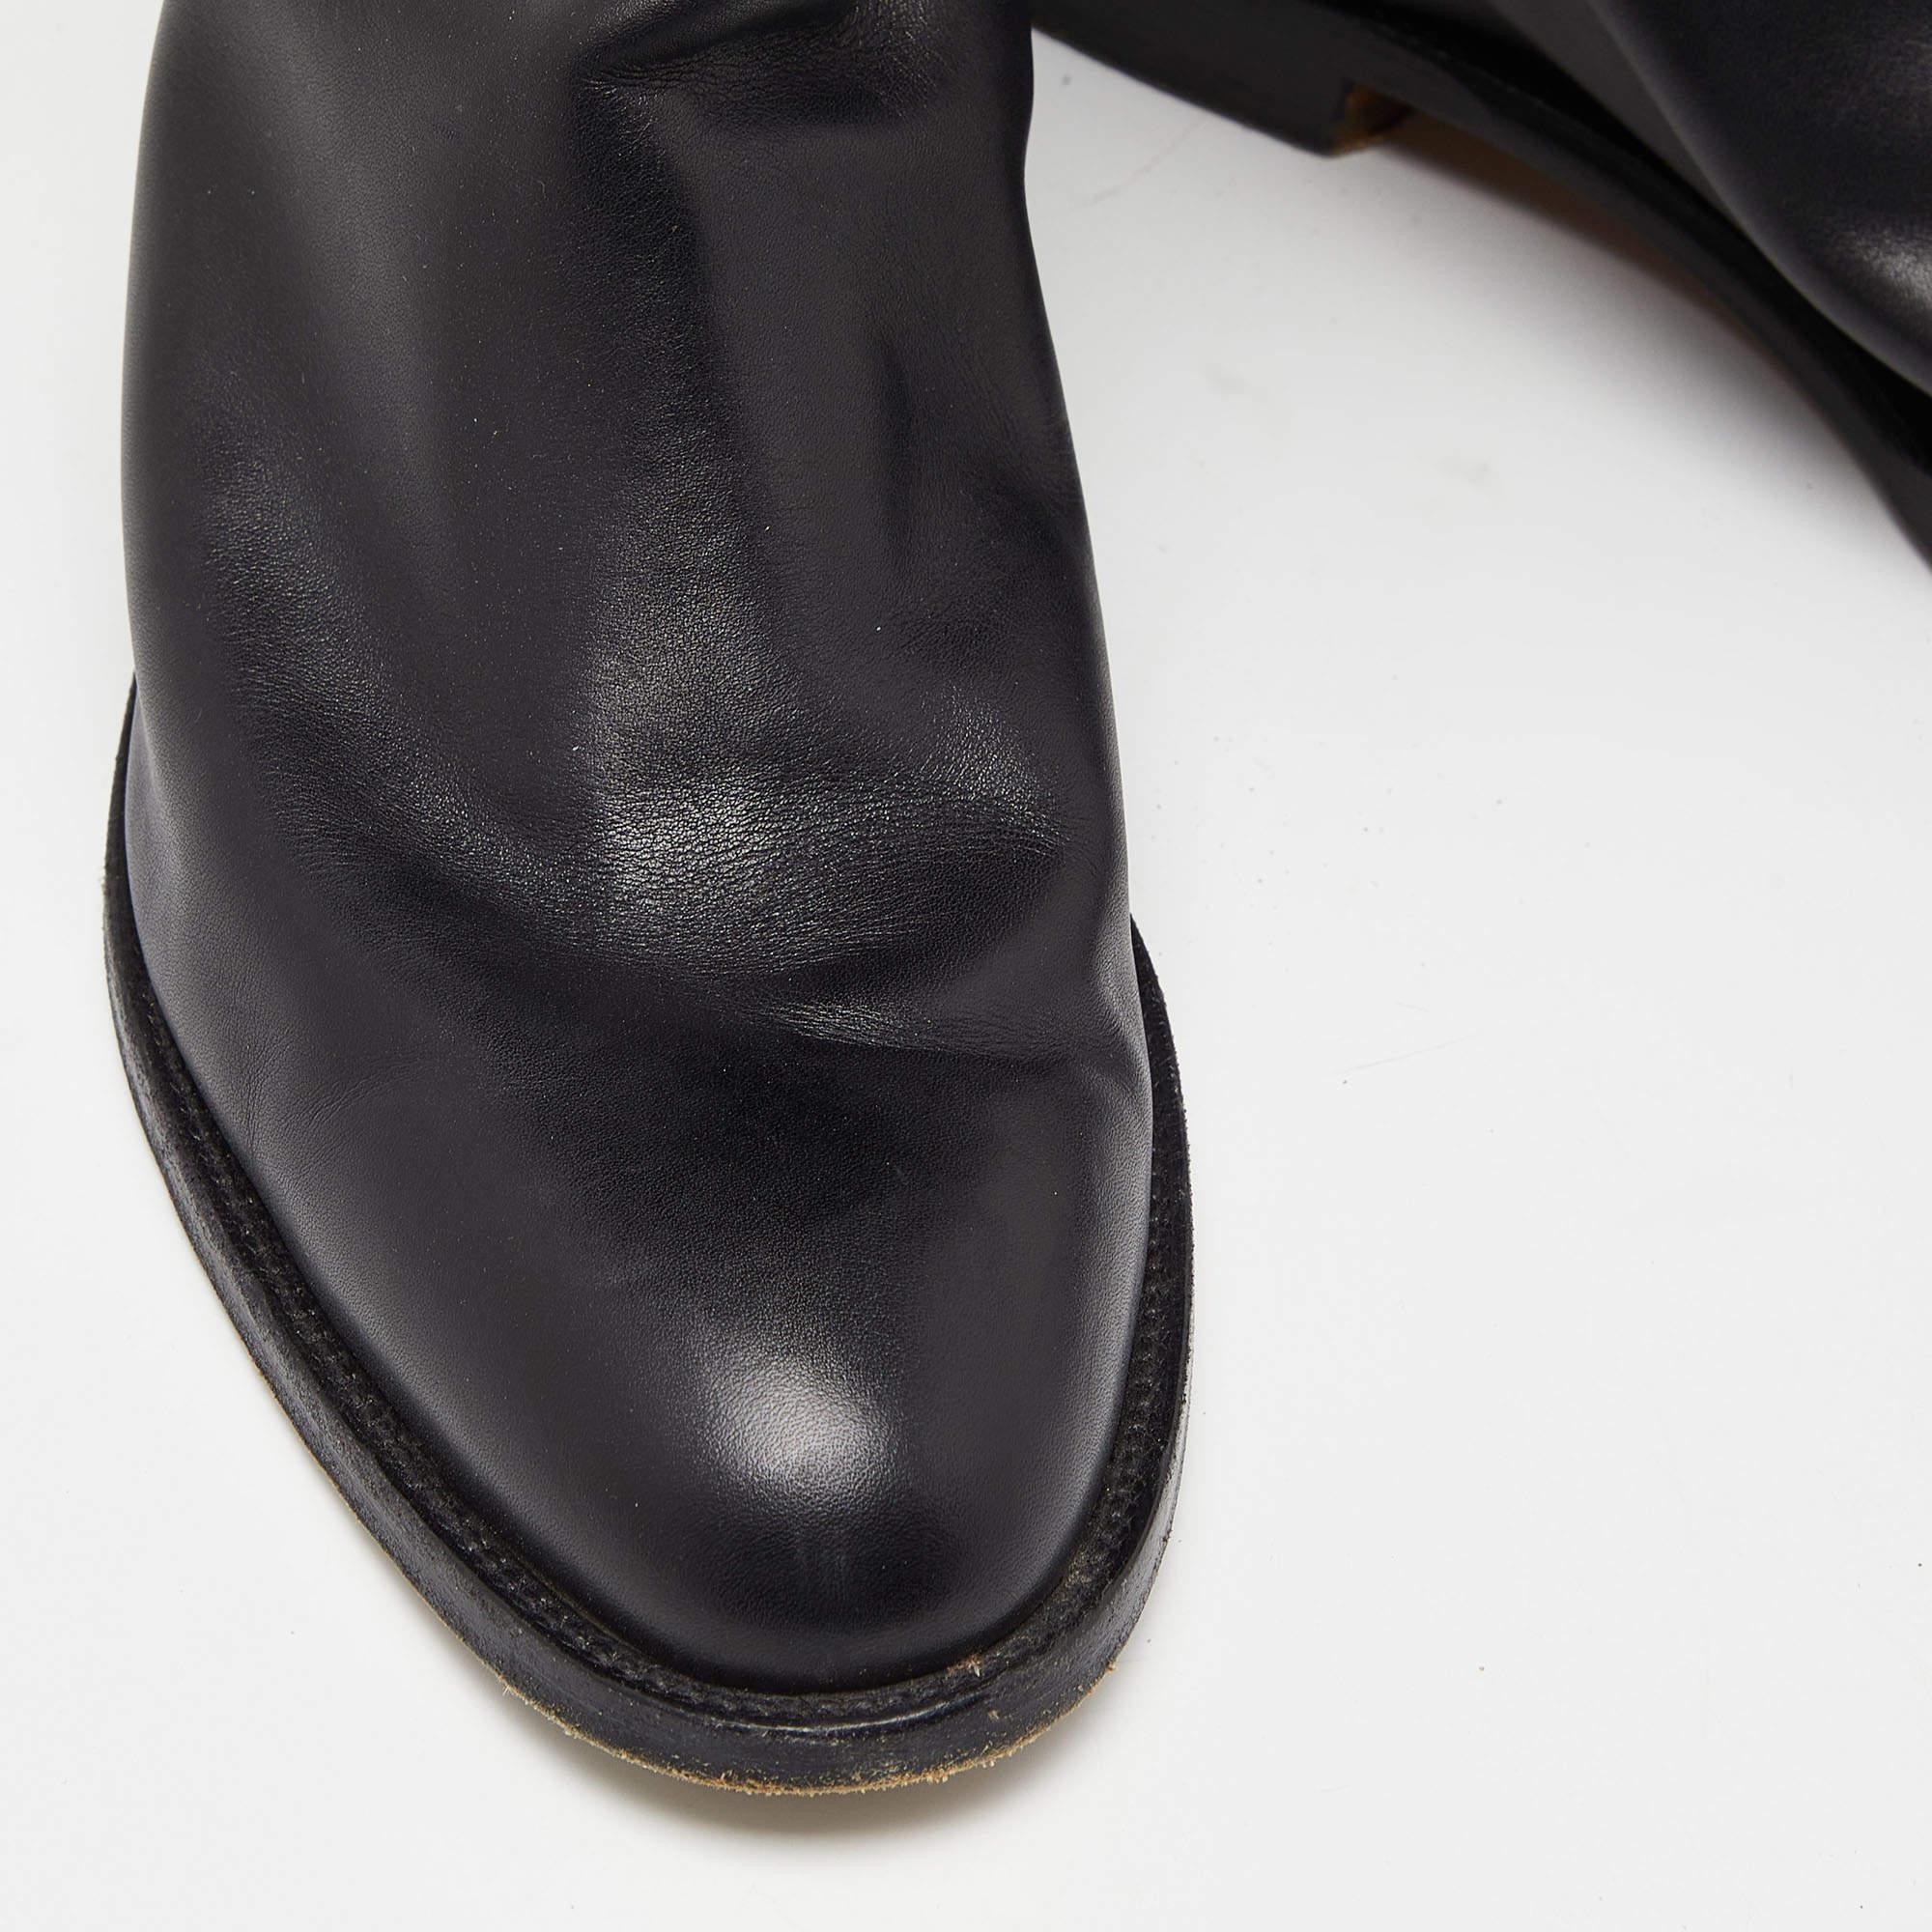  Hermes Black Leather Jumping Boots Size 40 4